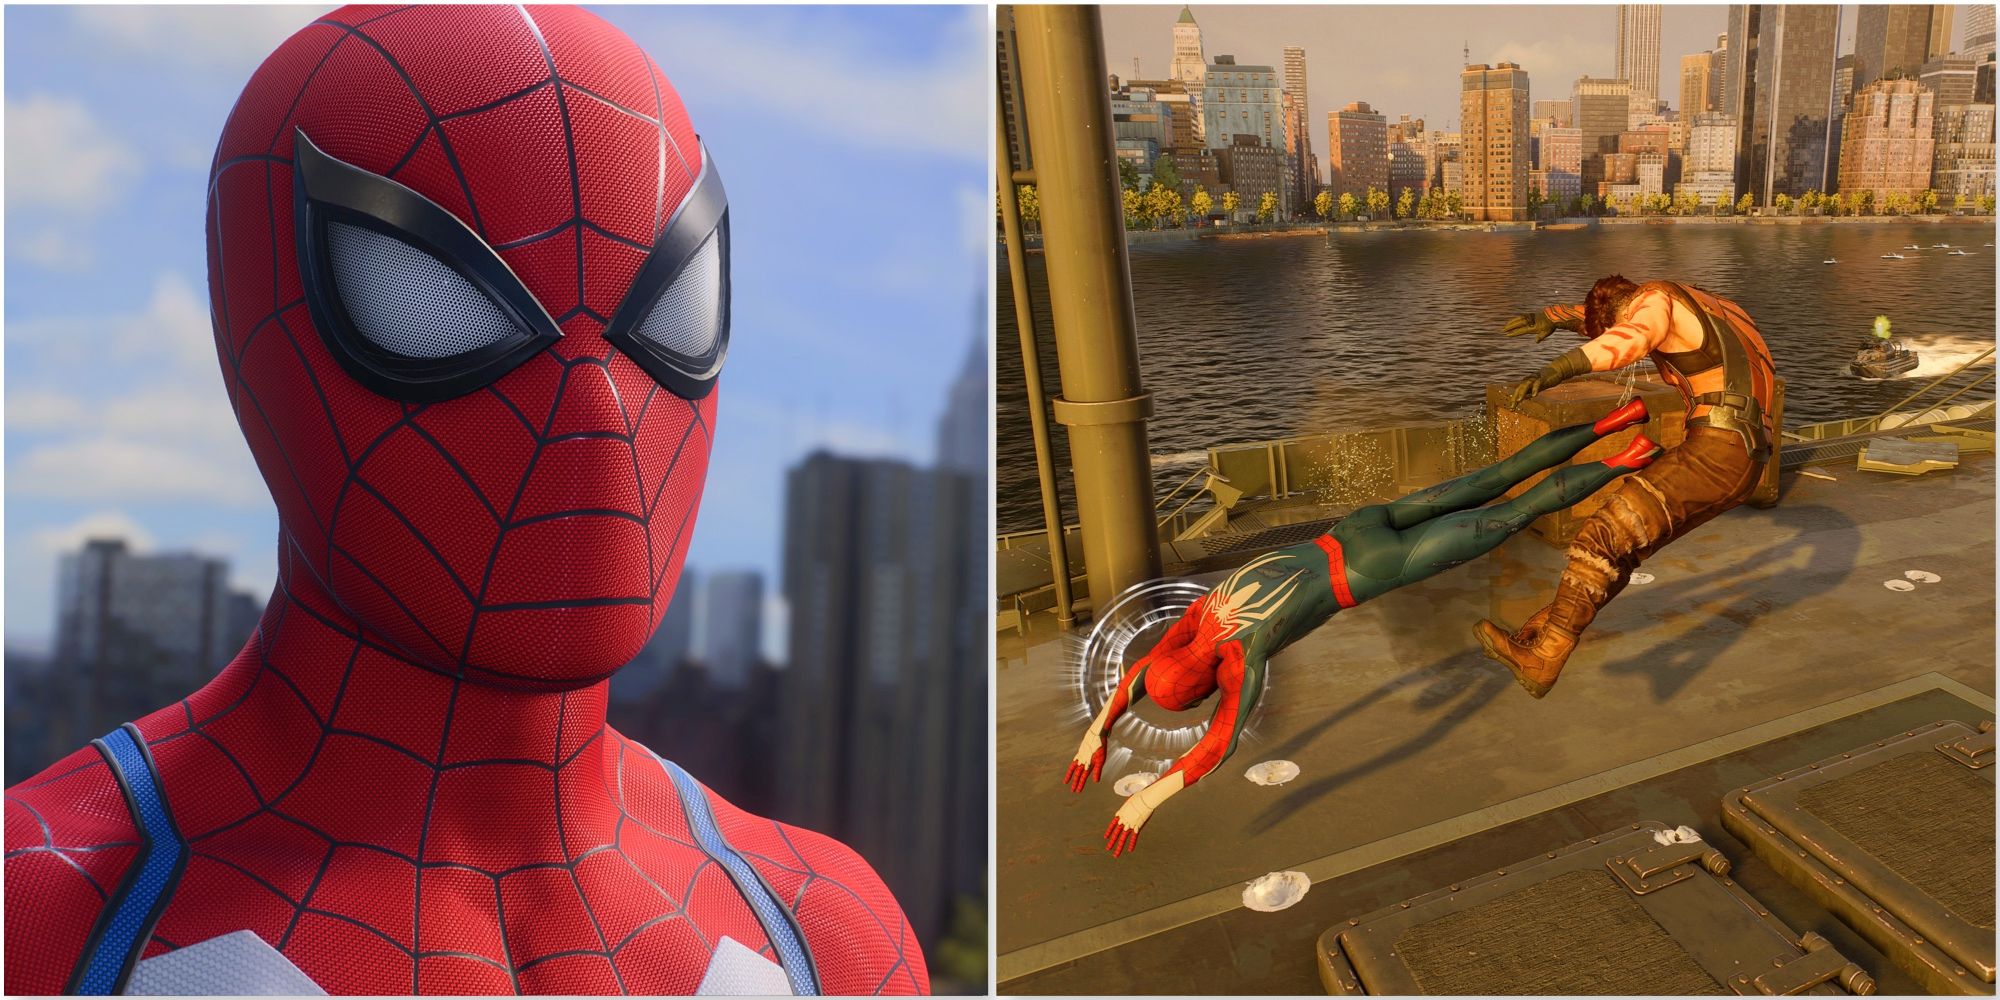 Spider-Man Peter and Fighting enemies in Marvel's Spider-Man 2